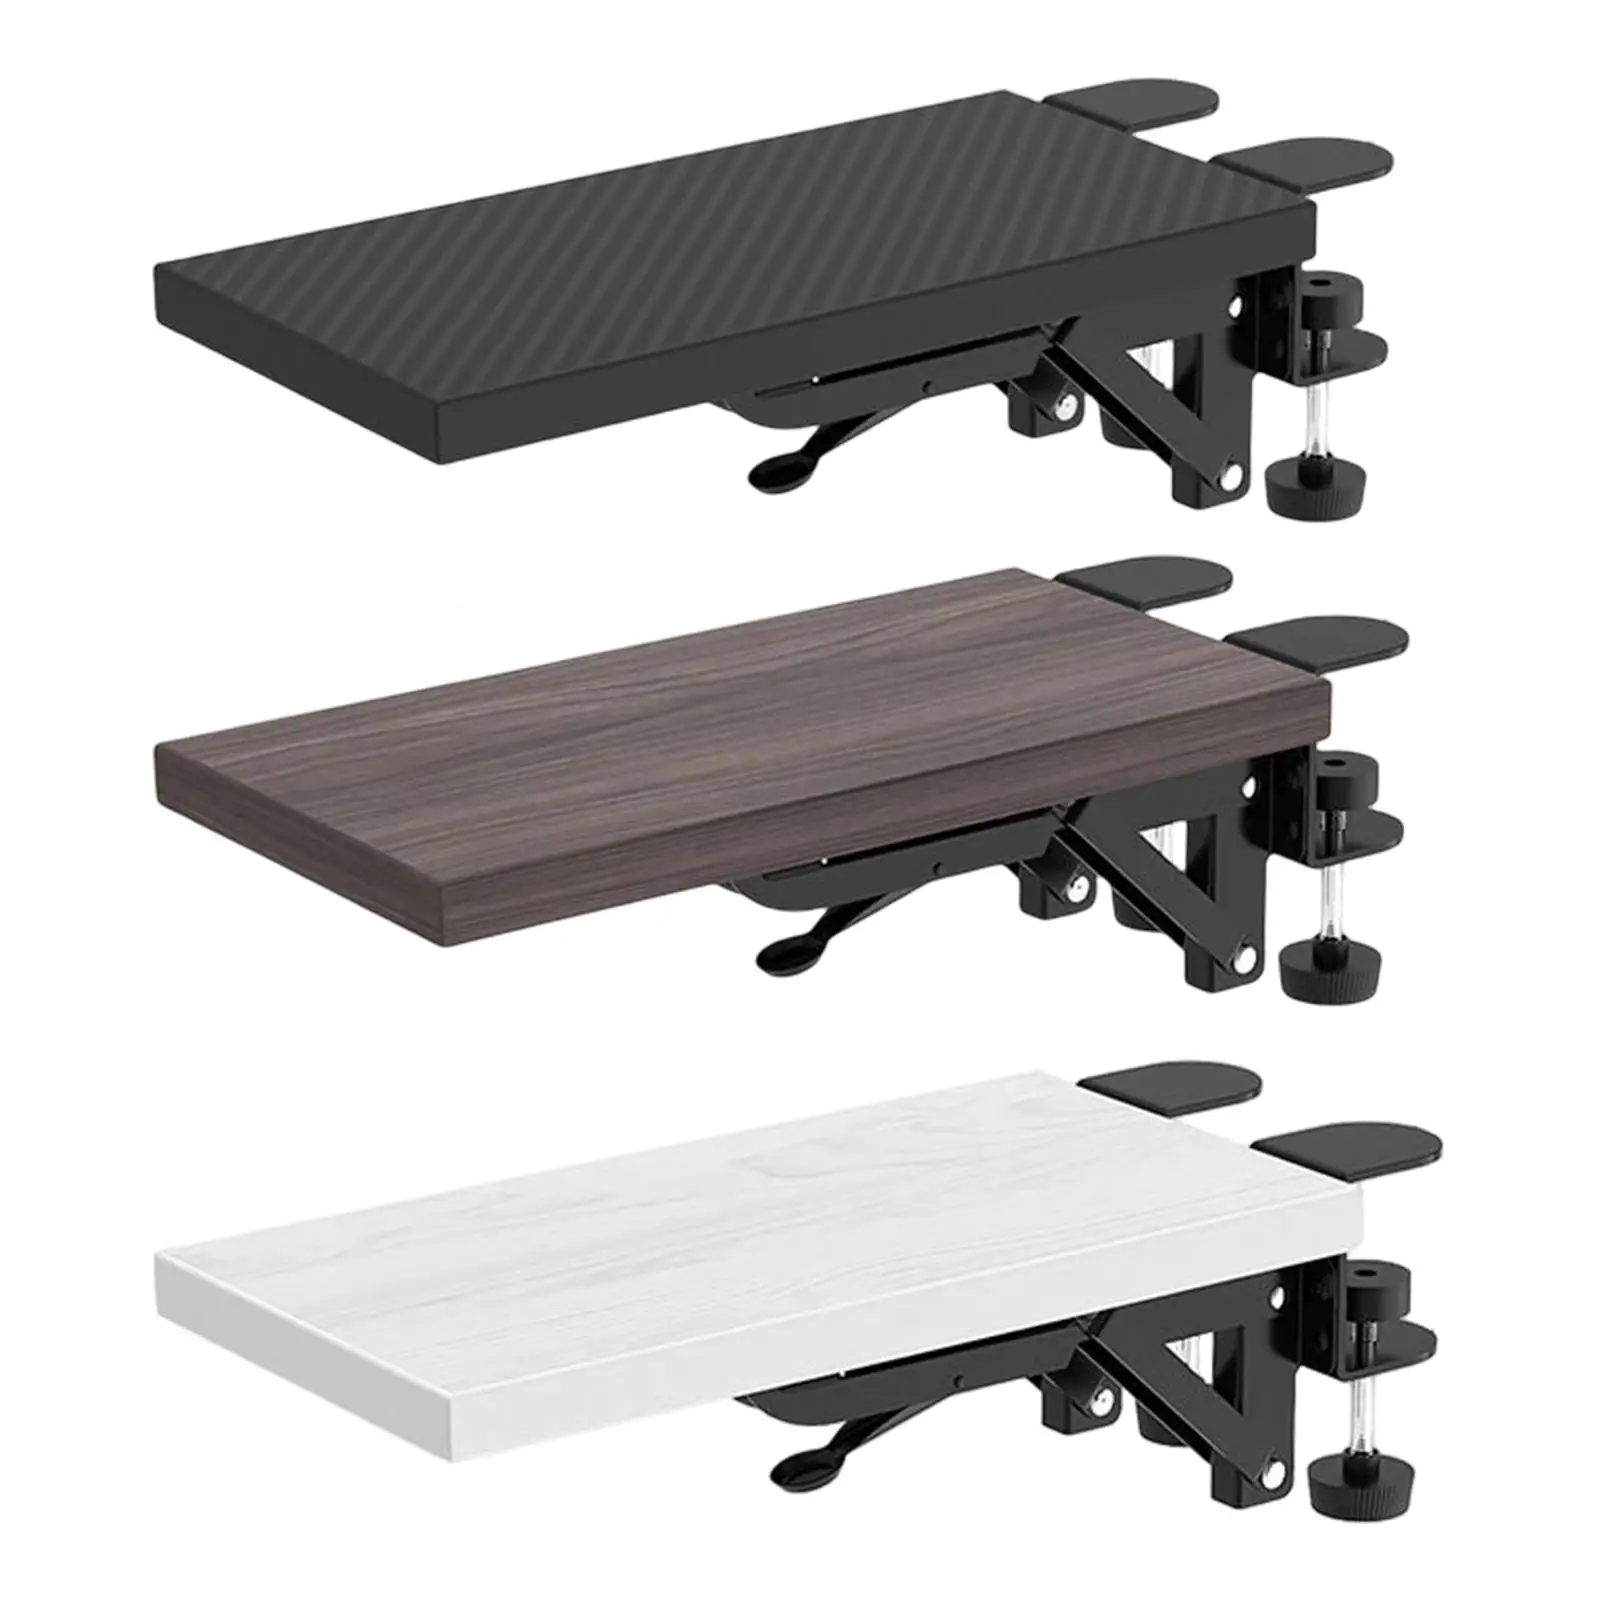 Computer Arm Rest Folding Wrist Rest Comfortable Extension Board for Table Office